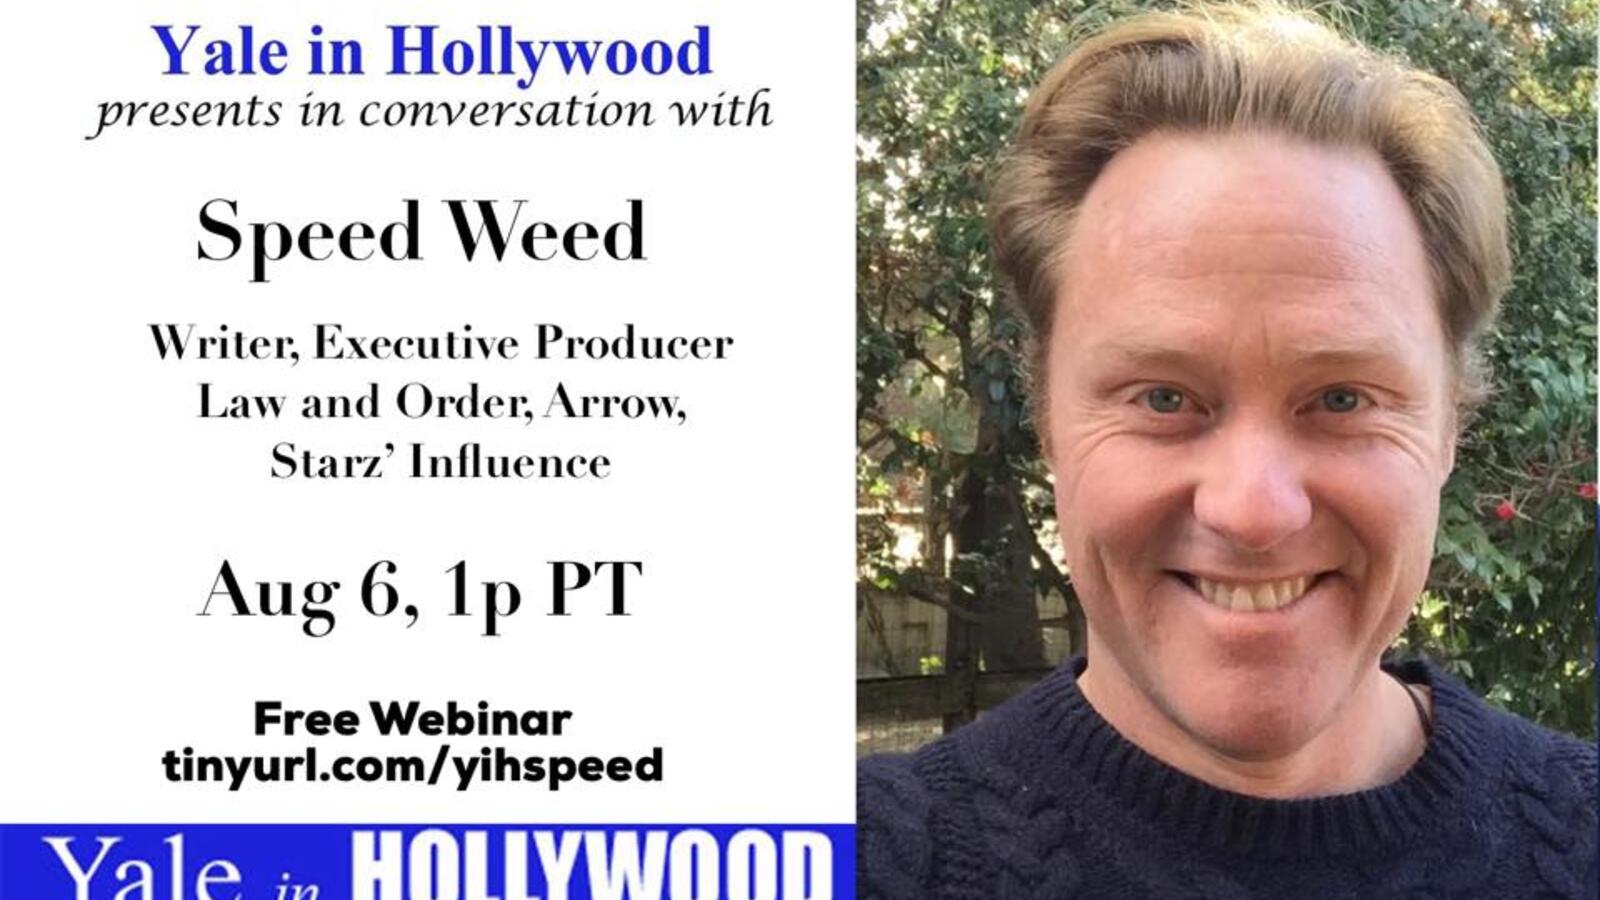 Graphic for webinar, "In Conversation: Speed Weed '93, Writer/Producer"